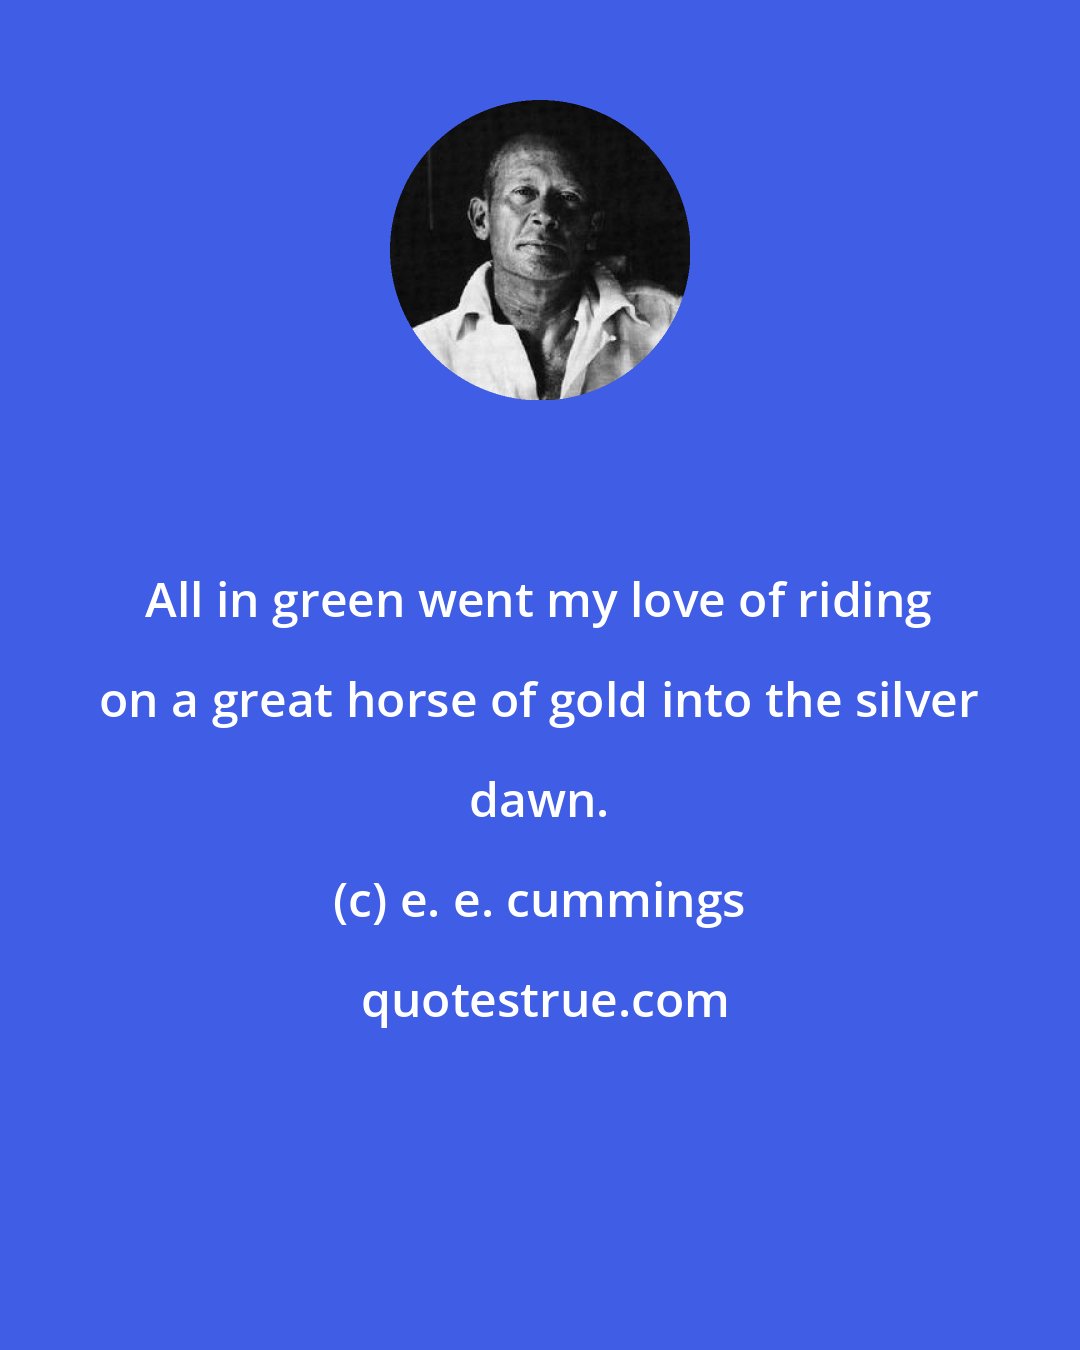 e. e. cummings: All in green went my love of riding on a great horse of gold into the silver dawn.